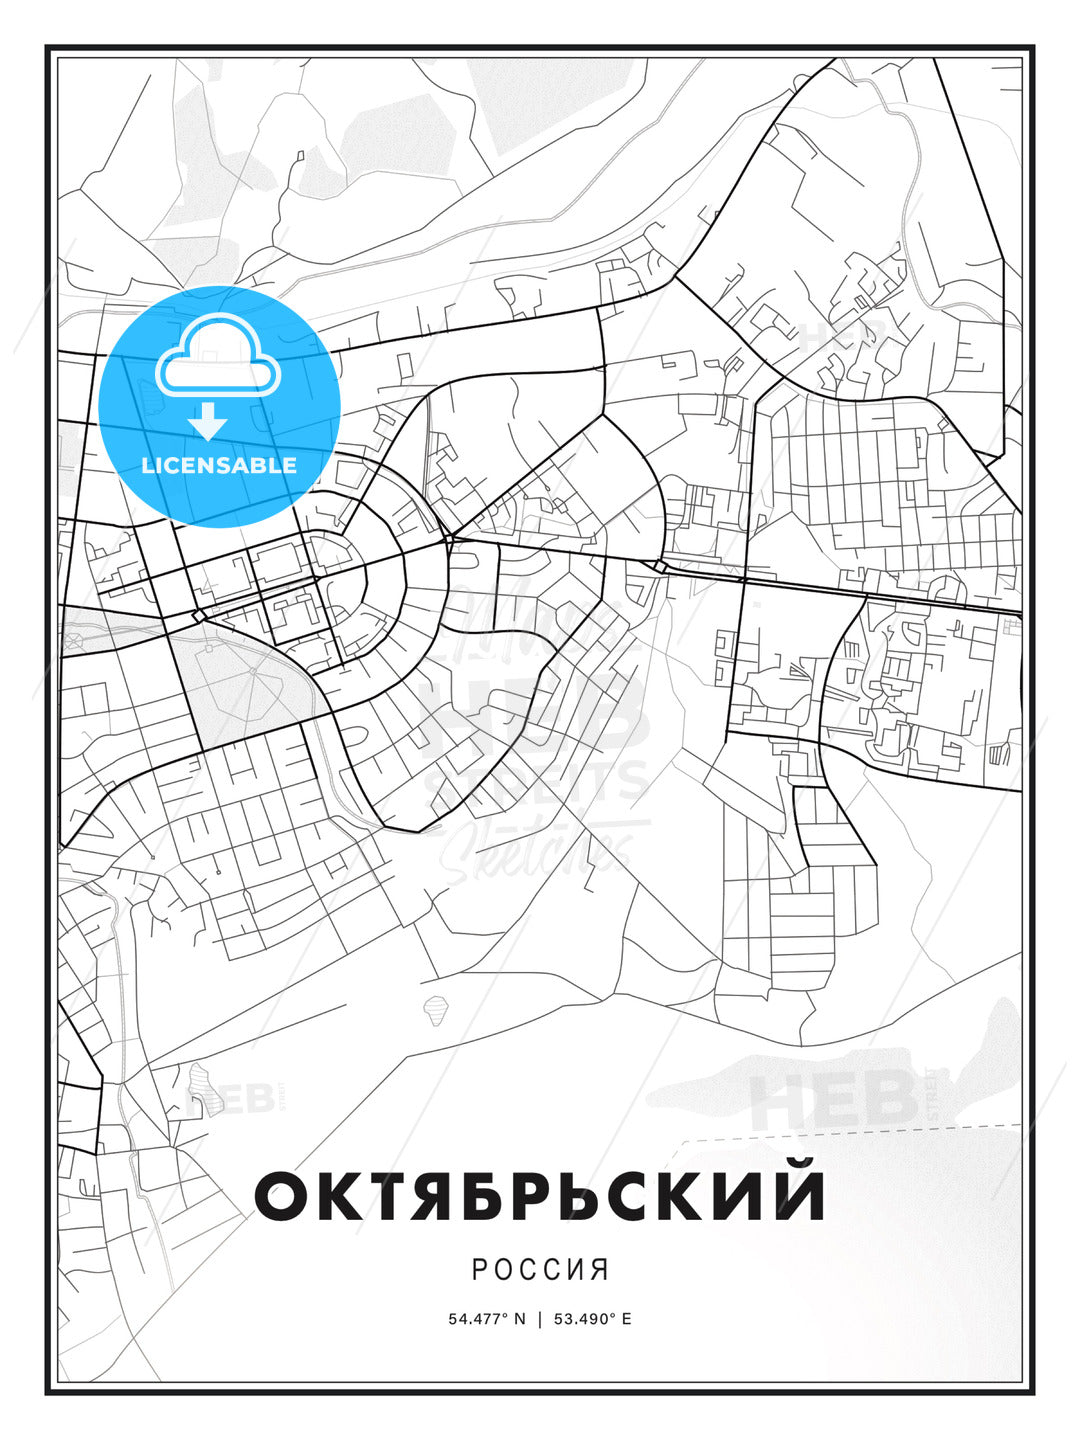 ОКТЯБРЬСКИЙ / Oktyabrsky, Russia, Modern Print Template in Various Formats - HEBSTREITS Sketches